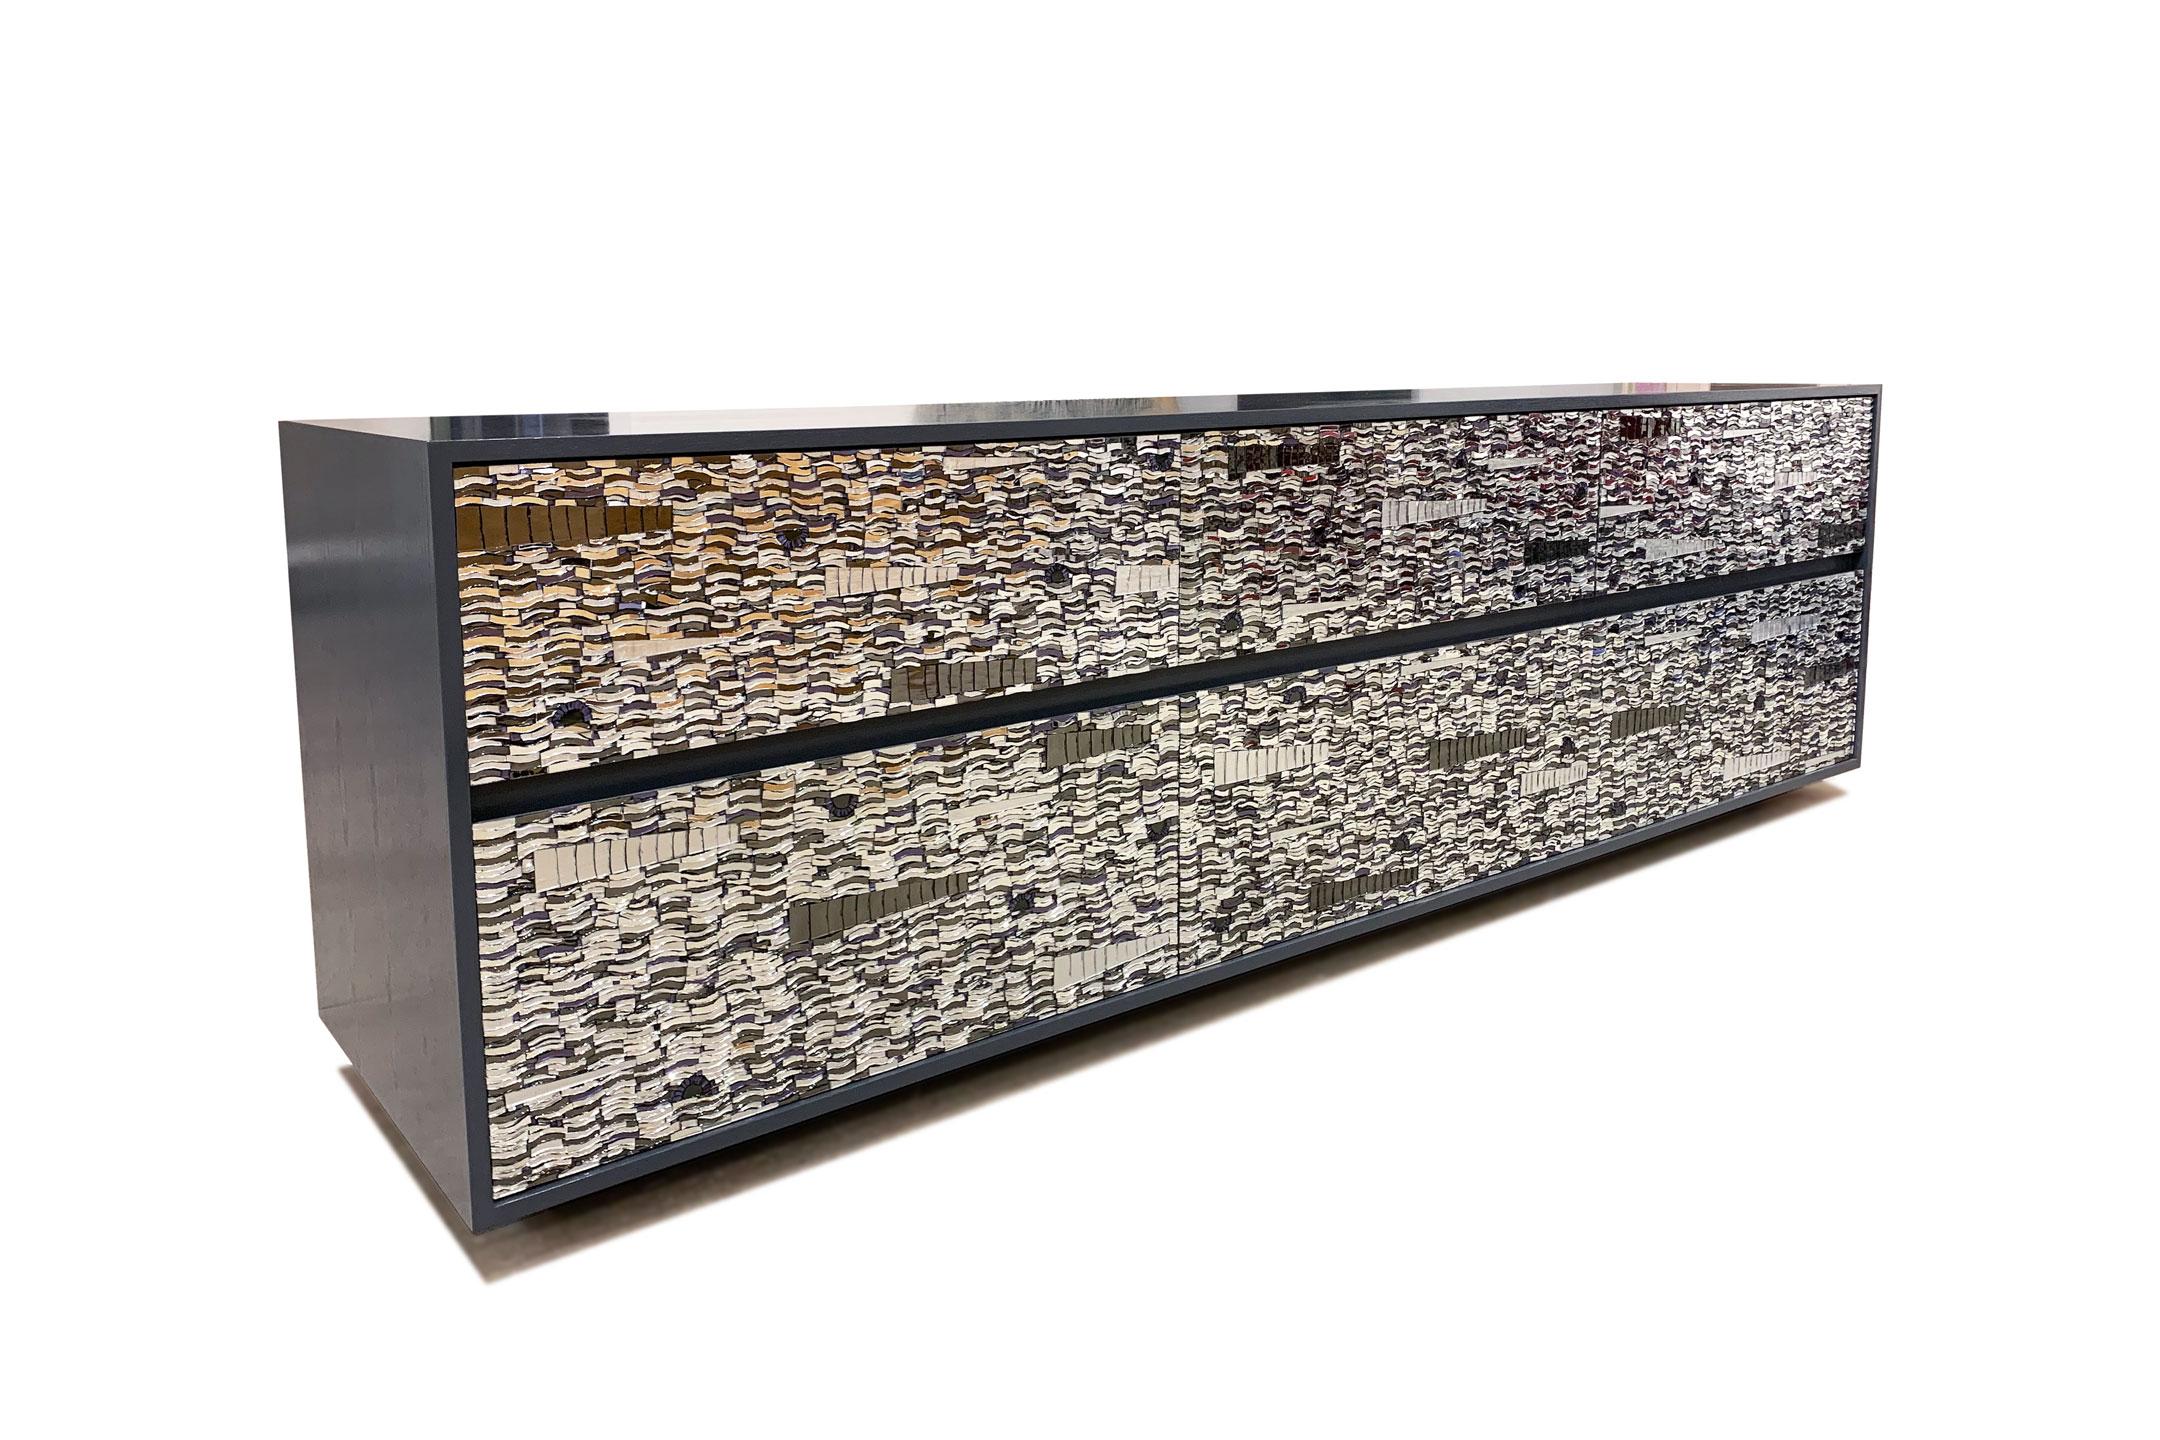 The Ravenna chest by Ercole Home has a 6-drawer front, with 2-3/8 H platform wood base.
Handcut glass mosaic in grey mirror, silver, mirror, and purple mirror decorate the surface in Ravenna Mosaic pattern.
Dark gray Lacquer wood finish on